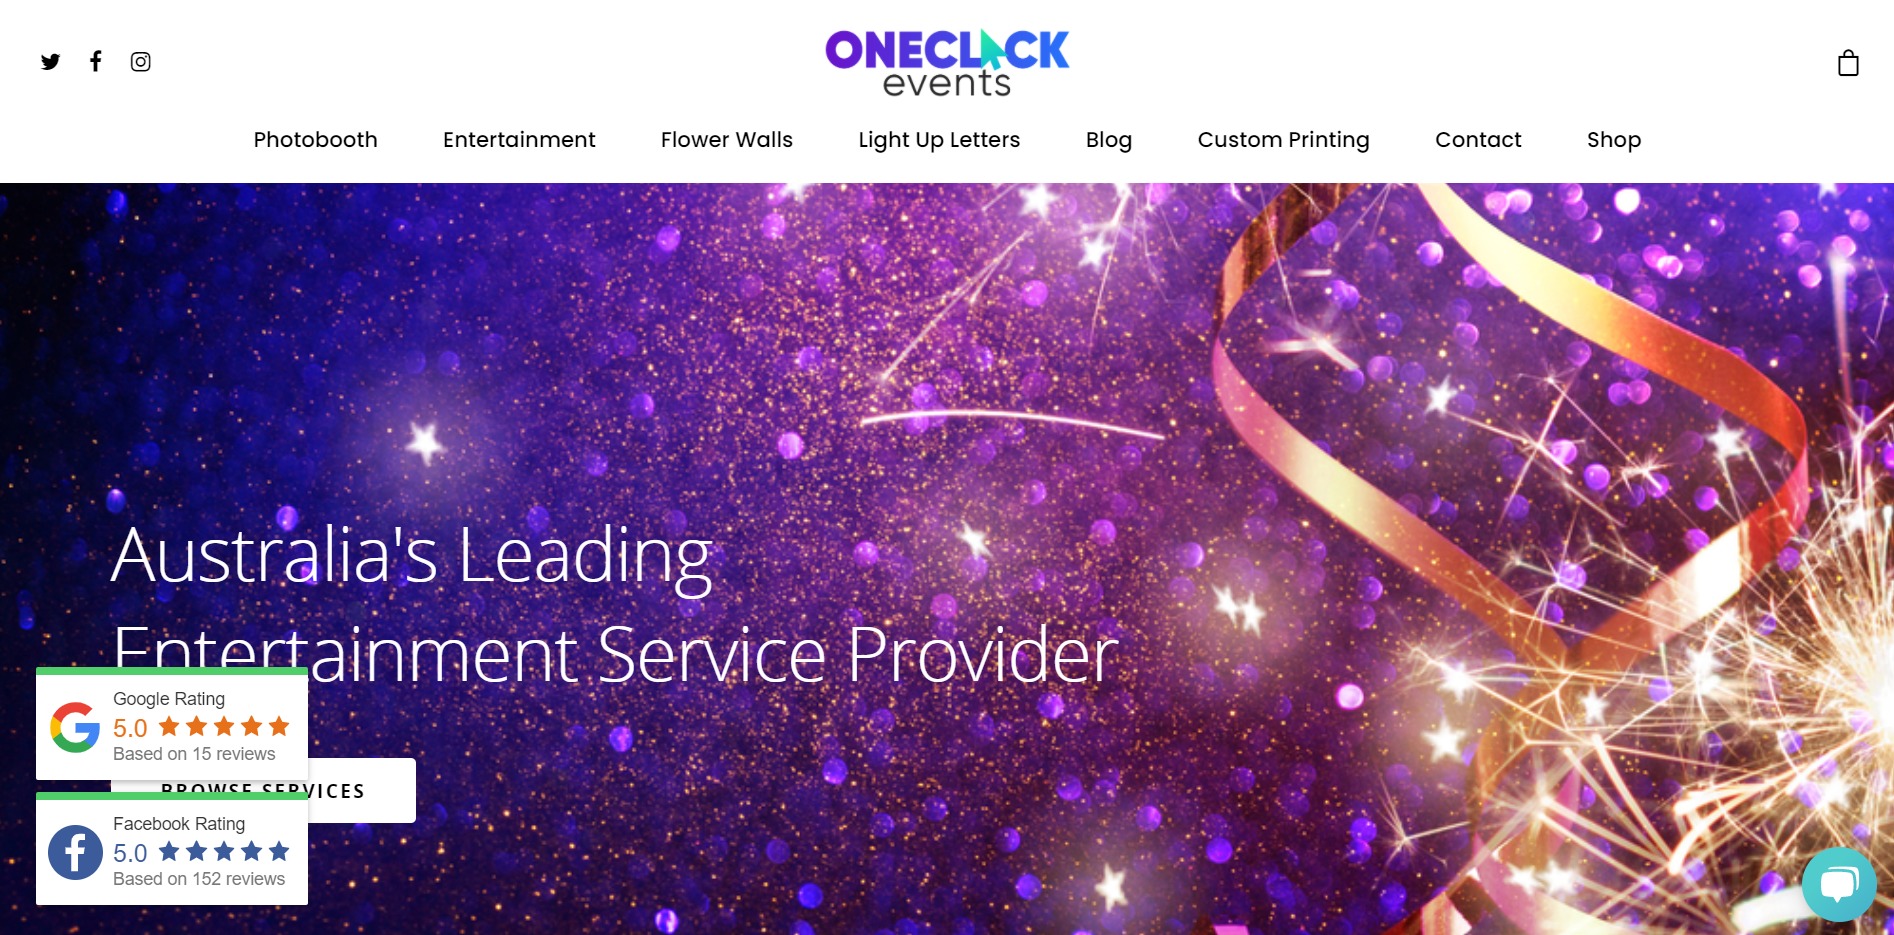 One Click Events